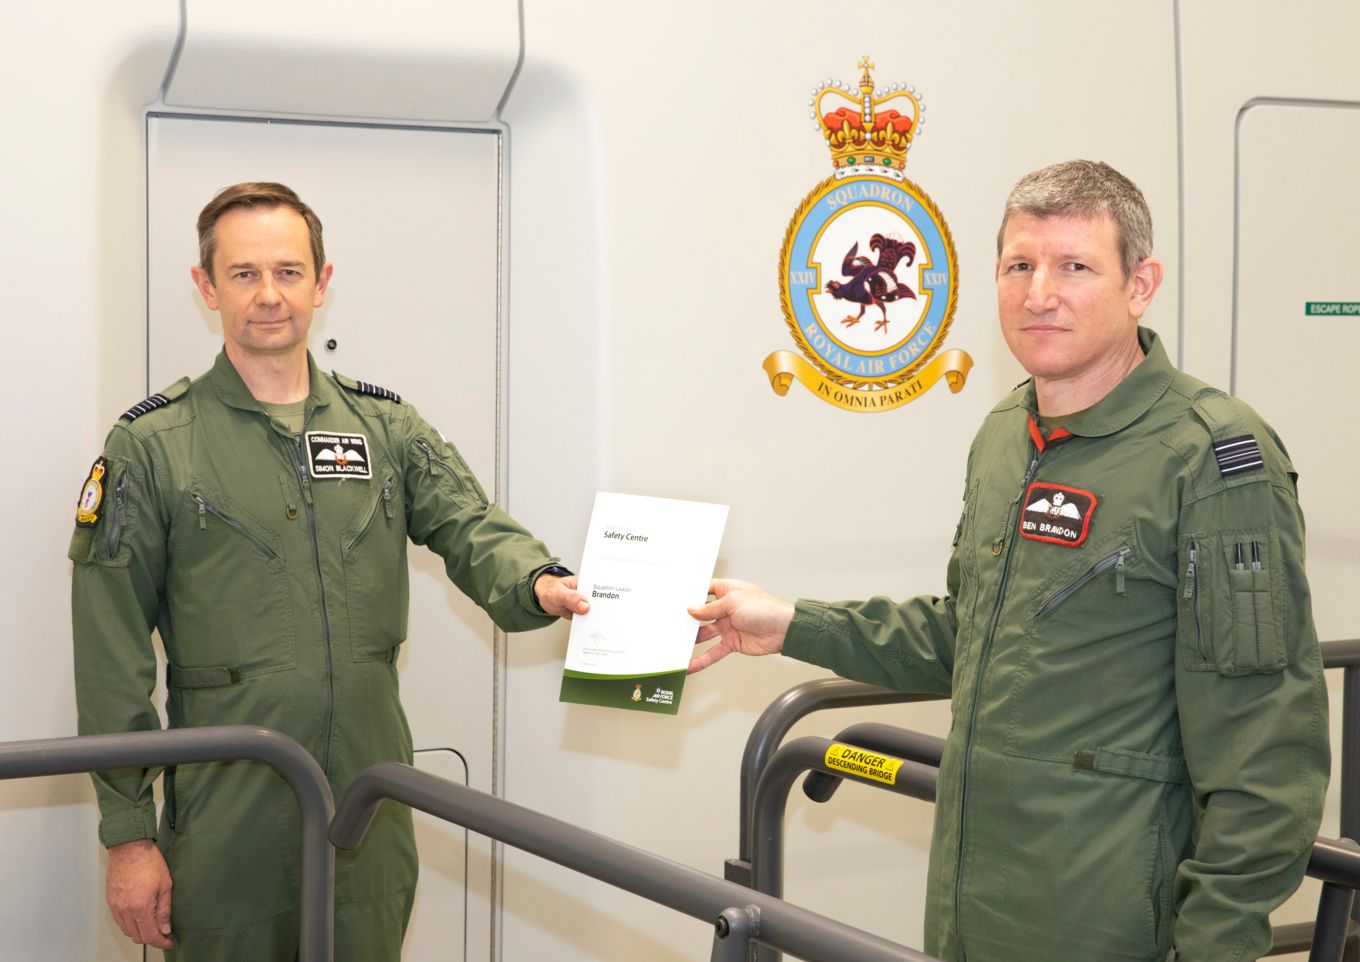 Squadron Leader Brandon being awarded an RAF Green Endorsement safety award by Commander Air Wing, Group Captain Blackwell at XXIV Squadron